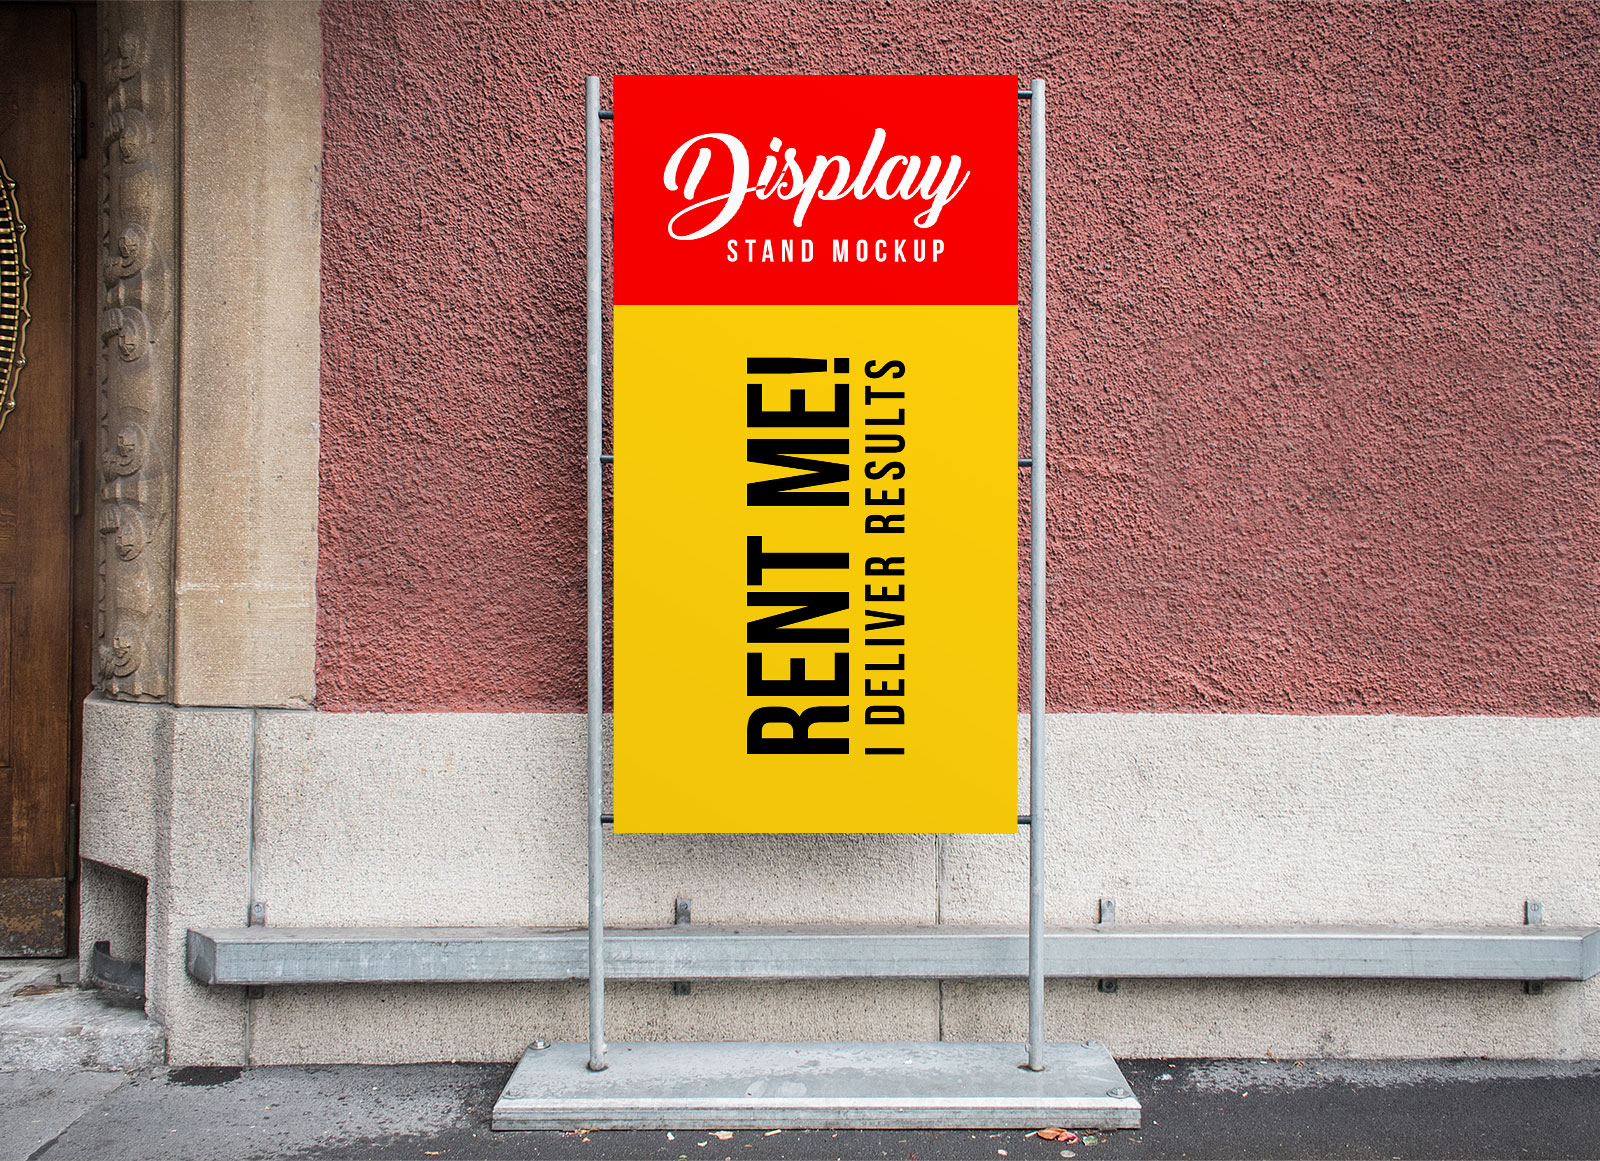 Download Free Outdoor Advertising Street Display Stand Mockup PSD ...